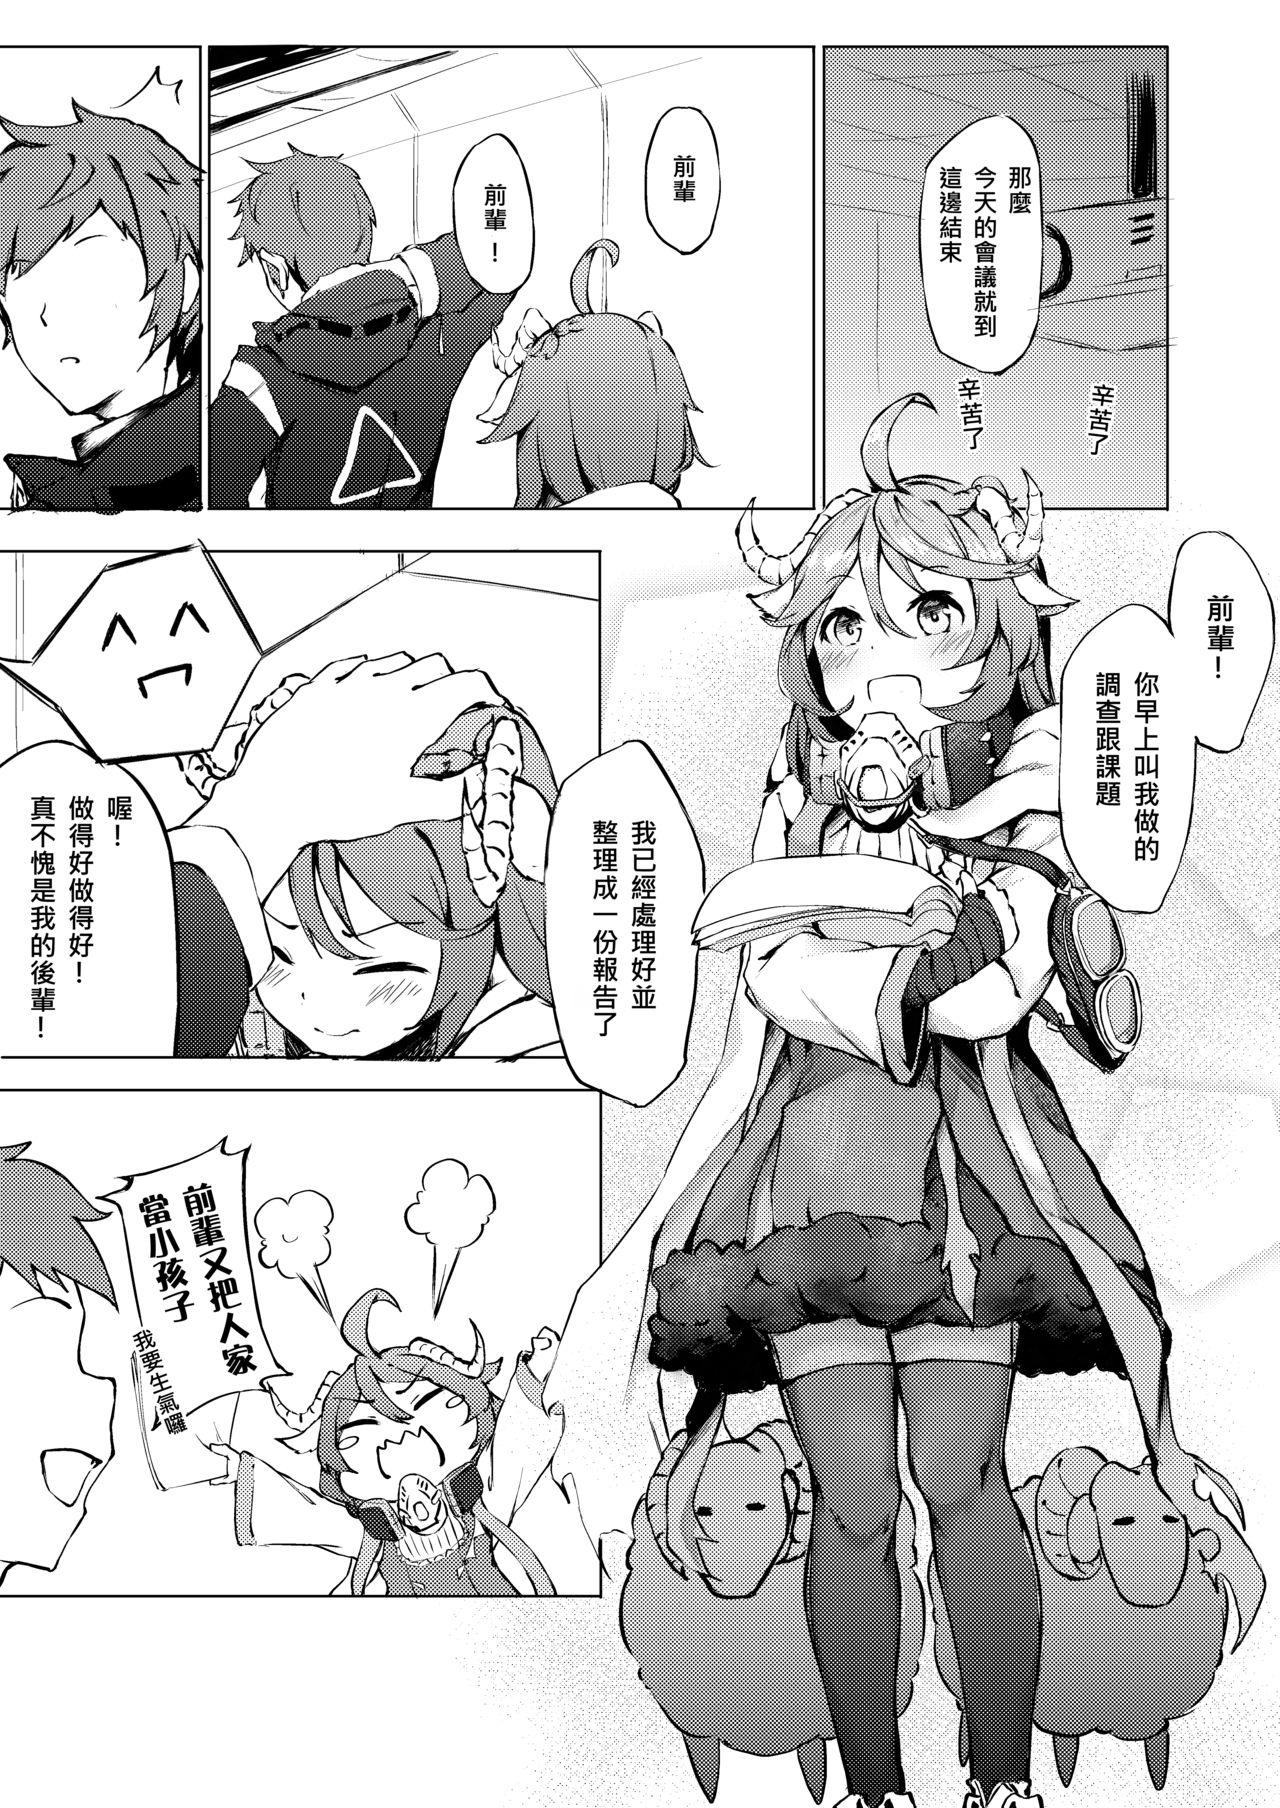 Freaky 不存在的聲音 | The Nonexistence Voice - Arknights Police - Page 5